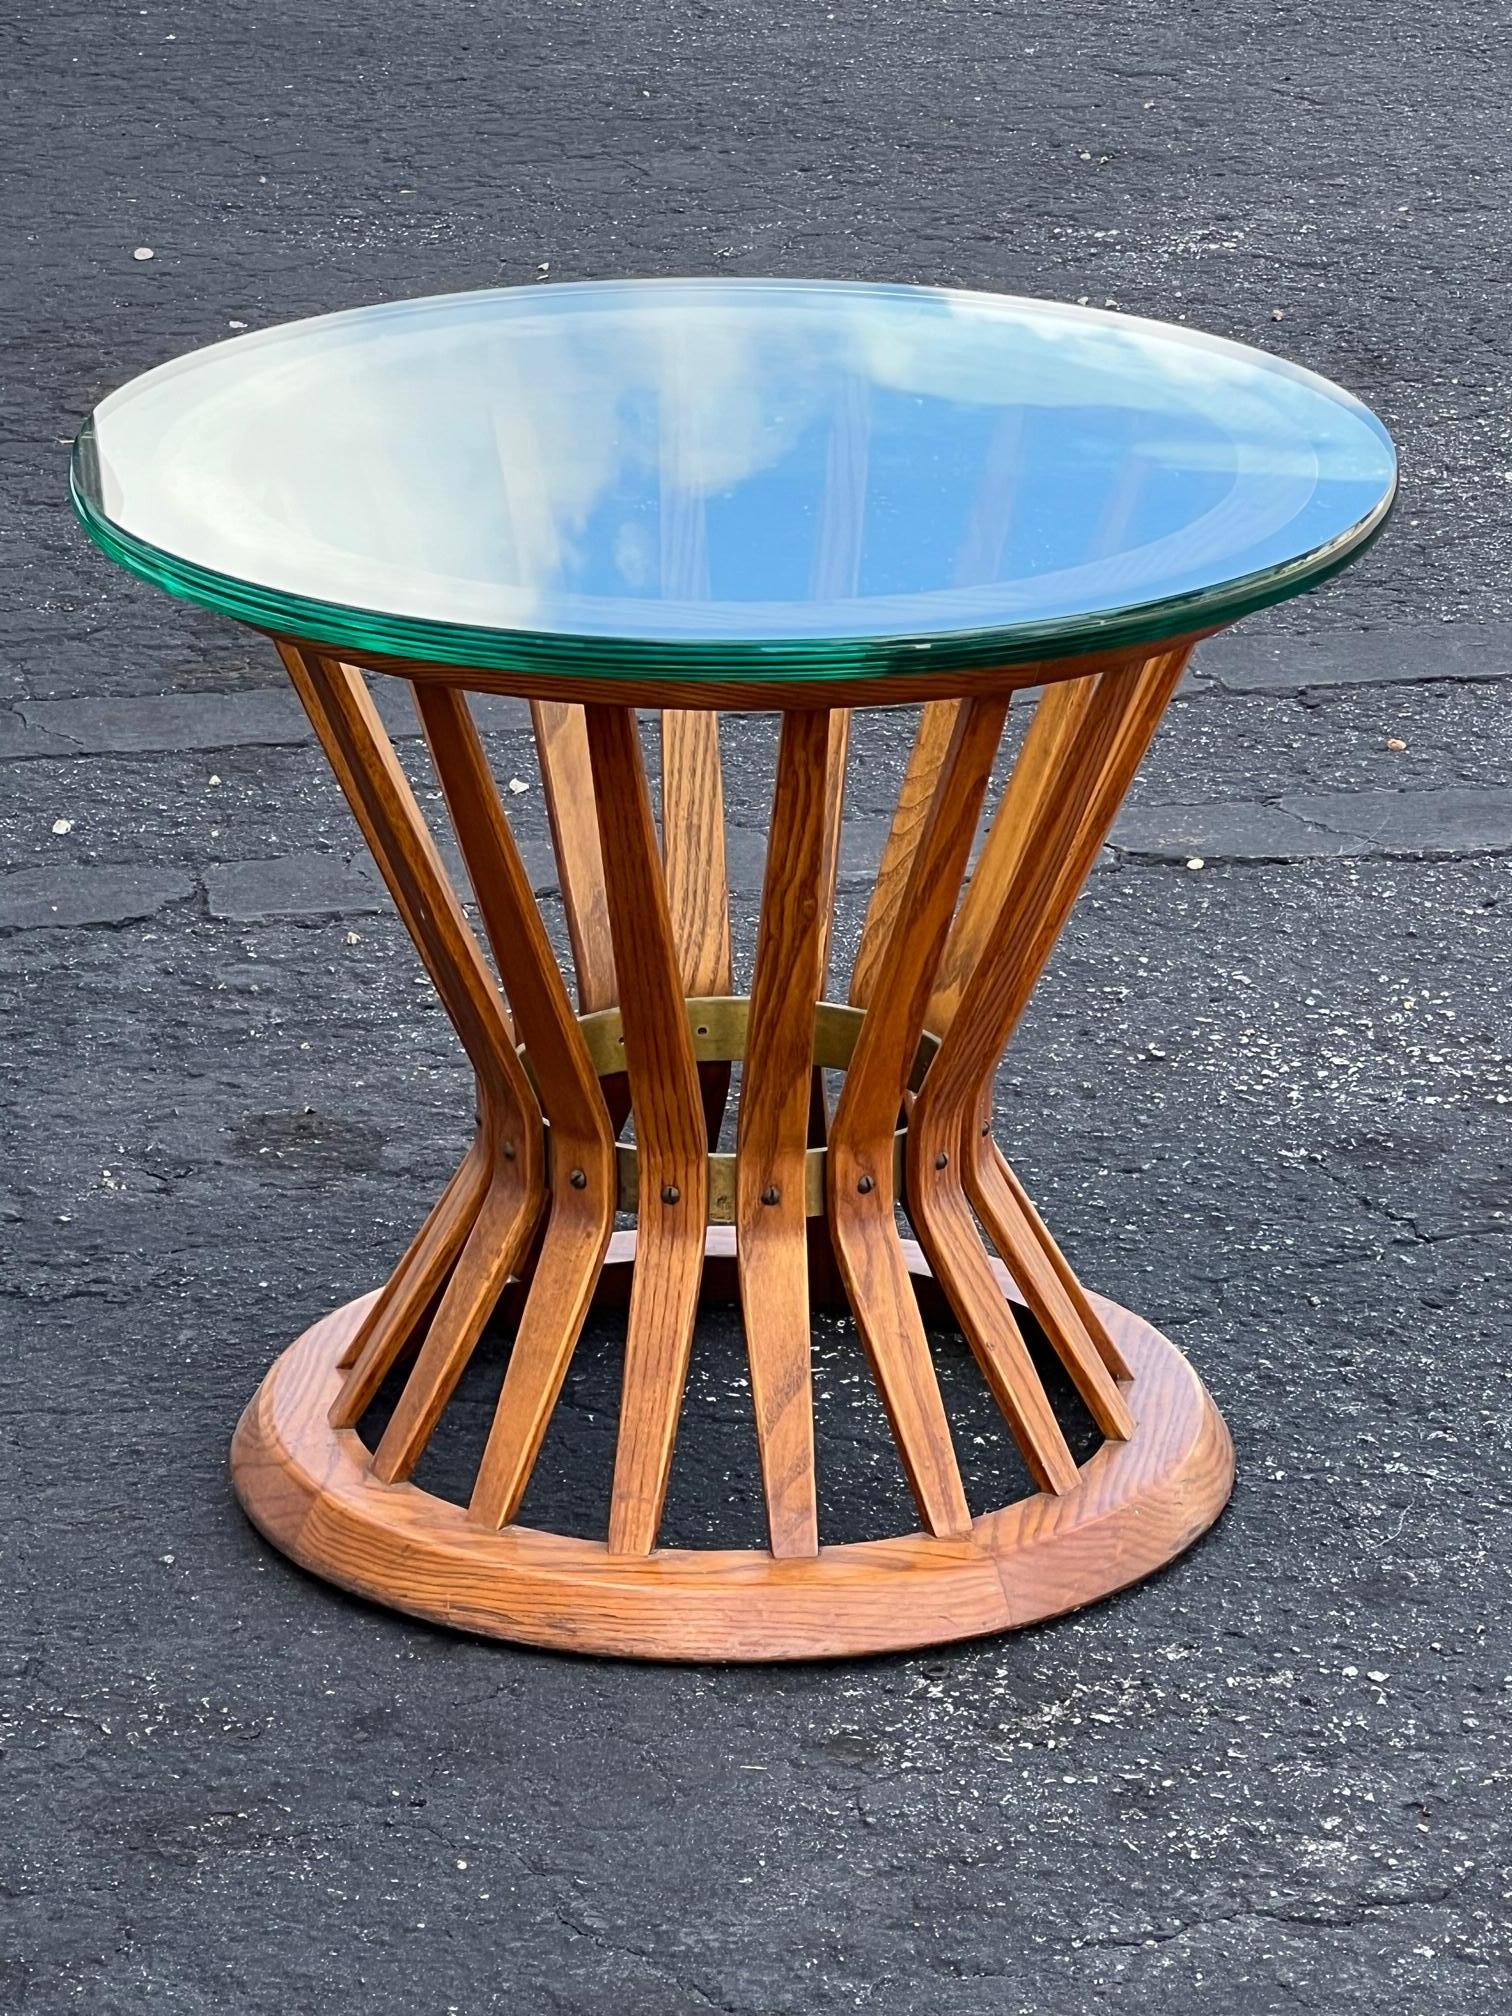 American Dunbar Sheaf Of Wheat Table With Glass Top For Sale